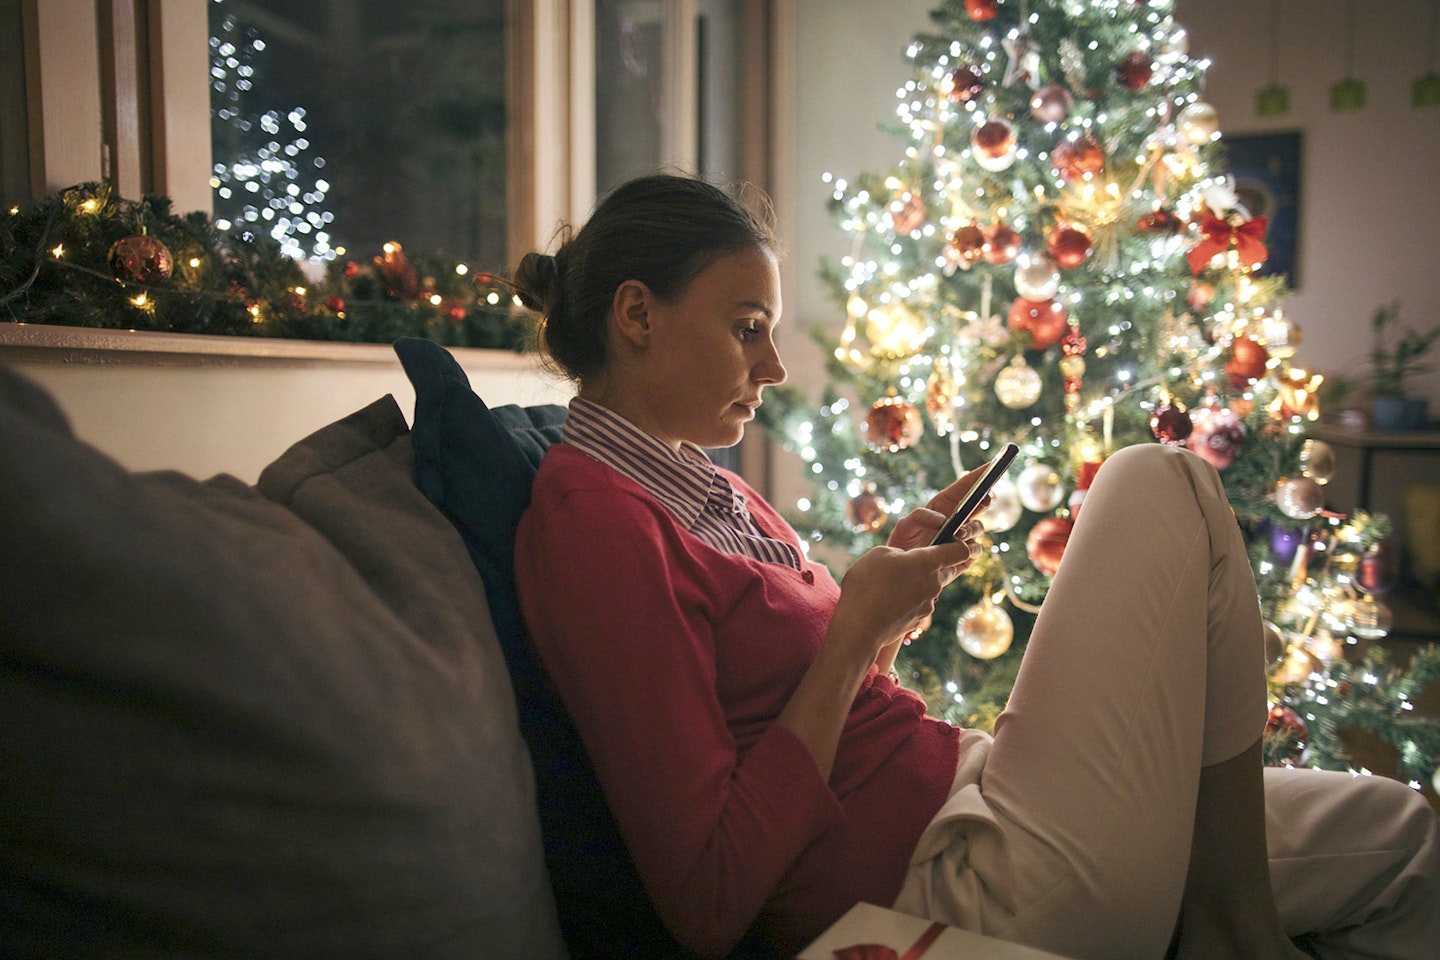 woman sat next to decorated Christmas tree